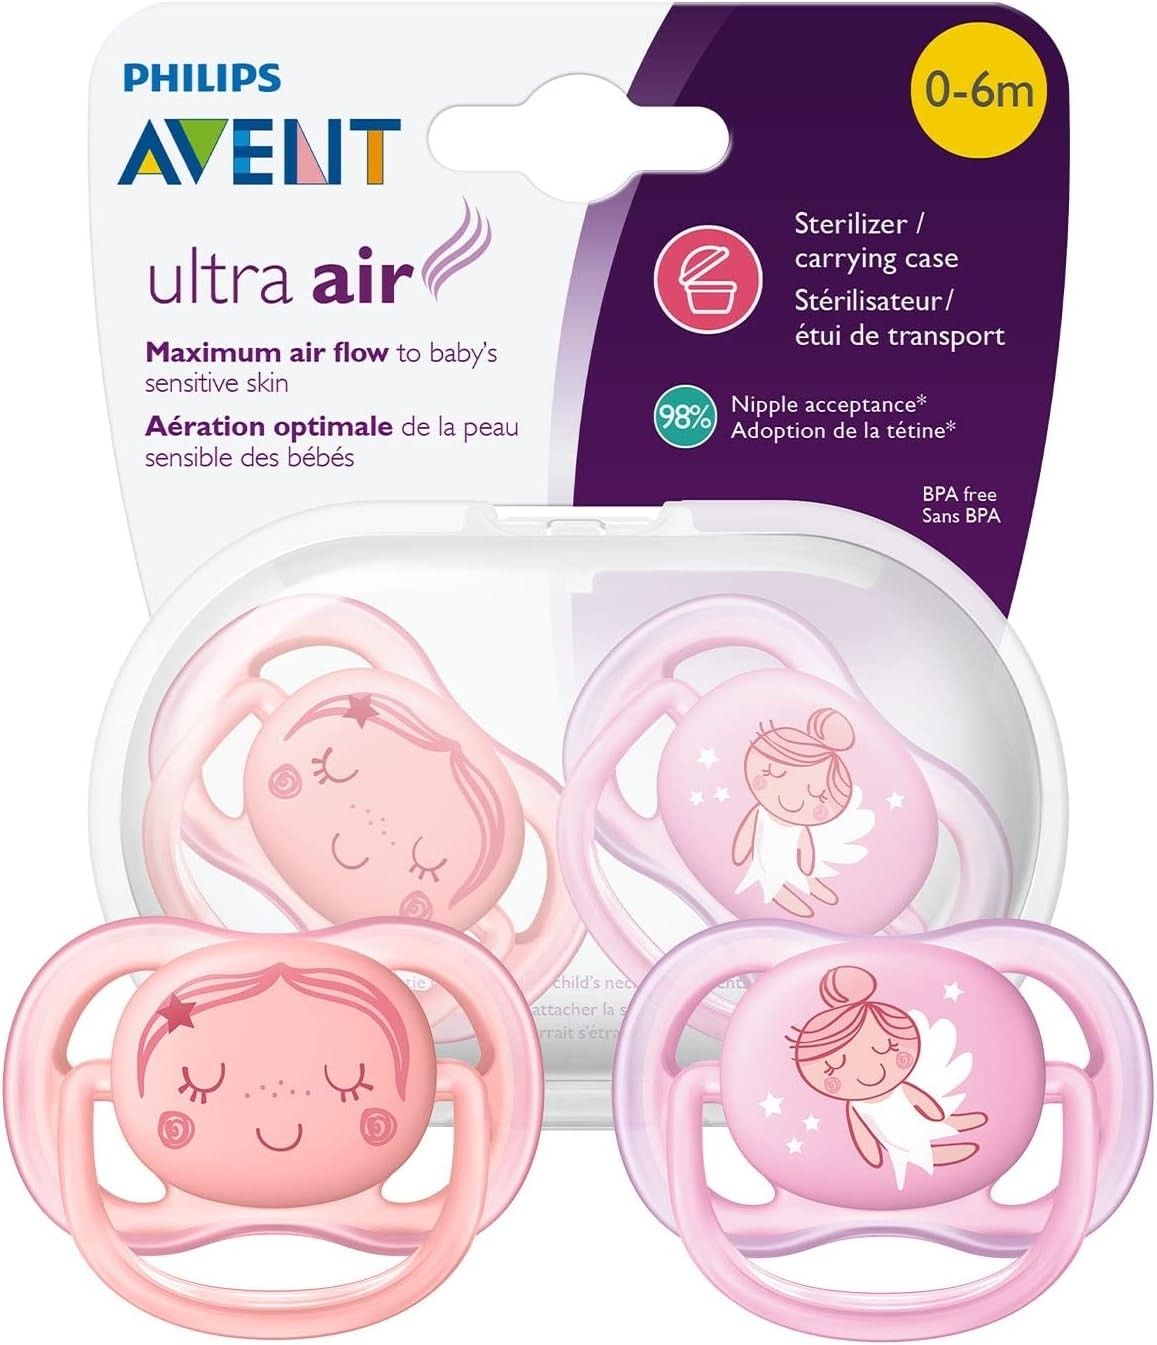 Philips Avent SCF345/20 Ultra Air Dummy 0-6 months, Breathable Orthodontic, BPA free, Double pack, Girl/Angel